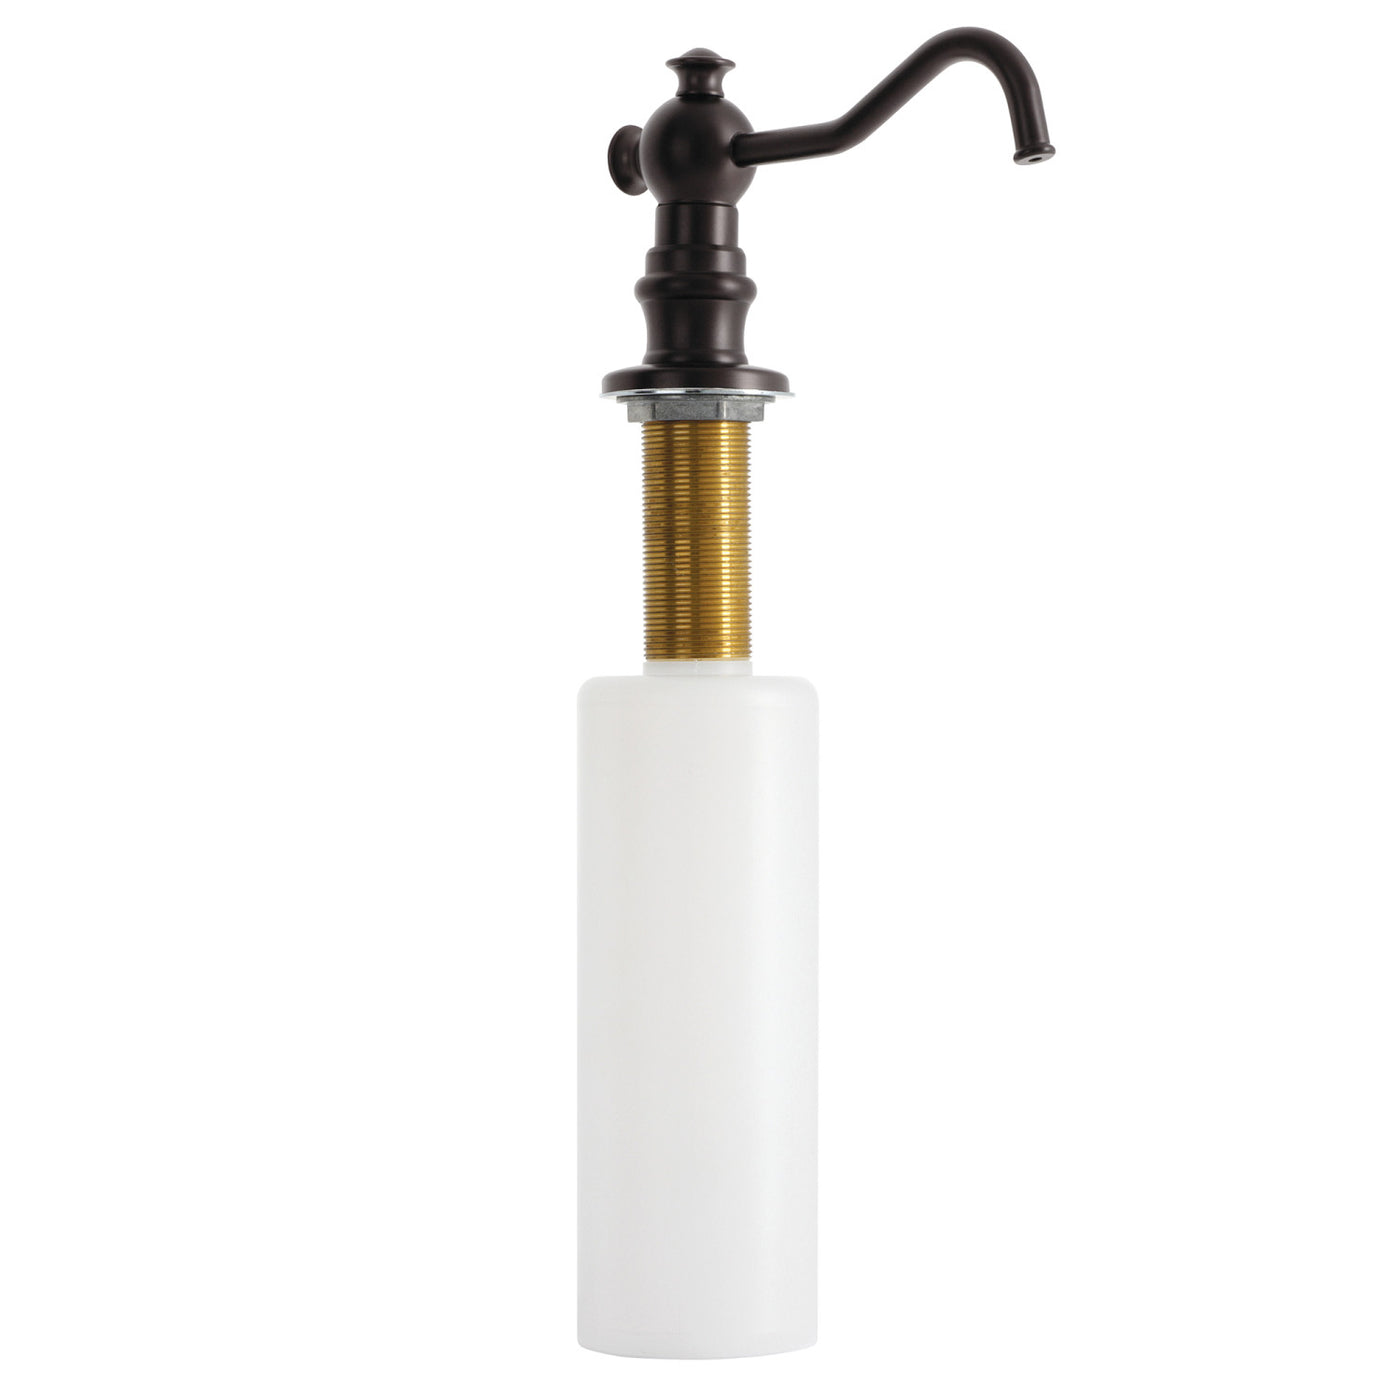 Elements of Design ESD7605 Curved Nozzle Metal Soap Dispenser, Oil Rubbed Bronze